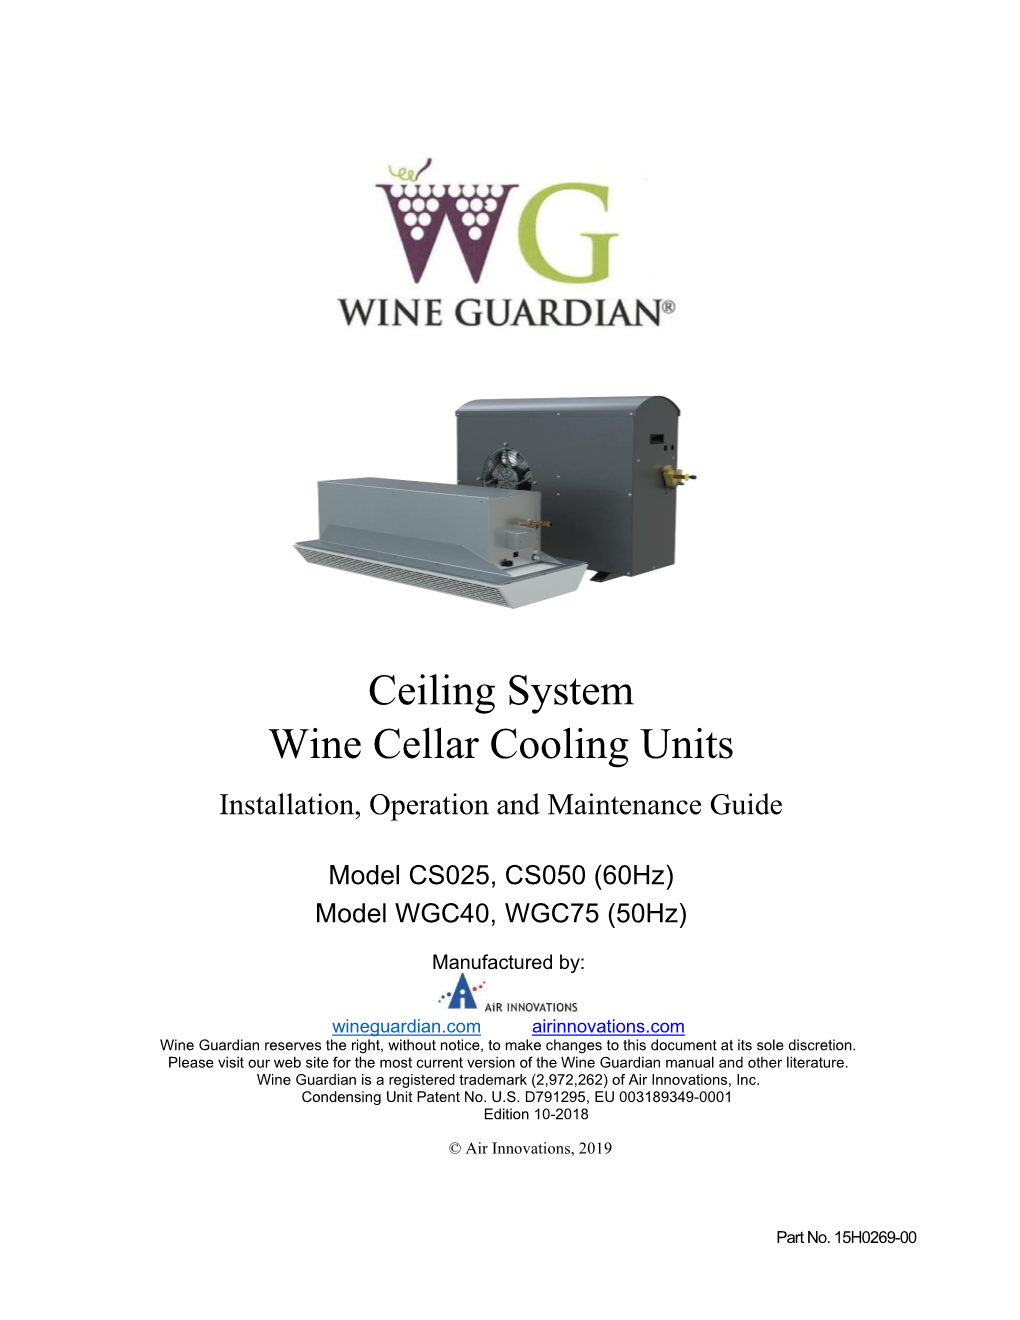 Ceiling System Wine Cellar Cooling Units Installation, Operation and Maintenance Guide